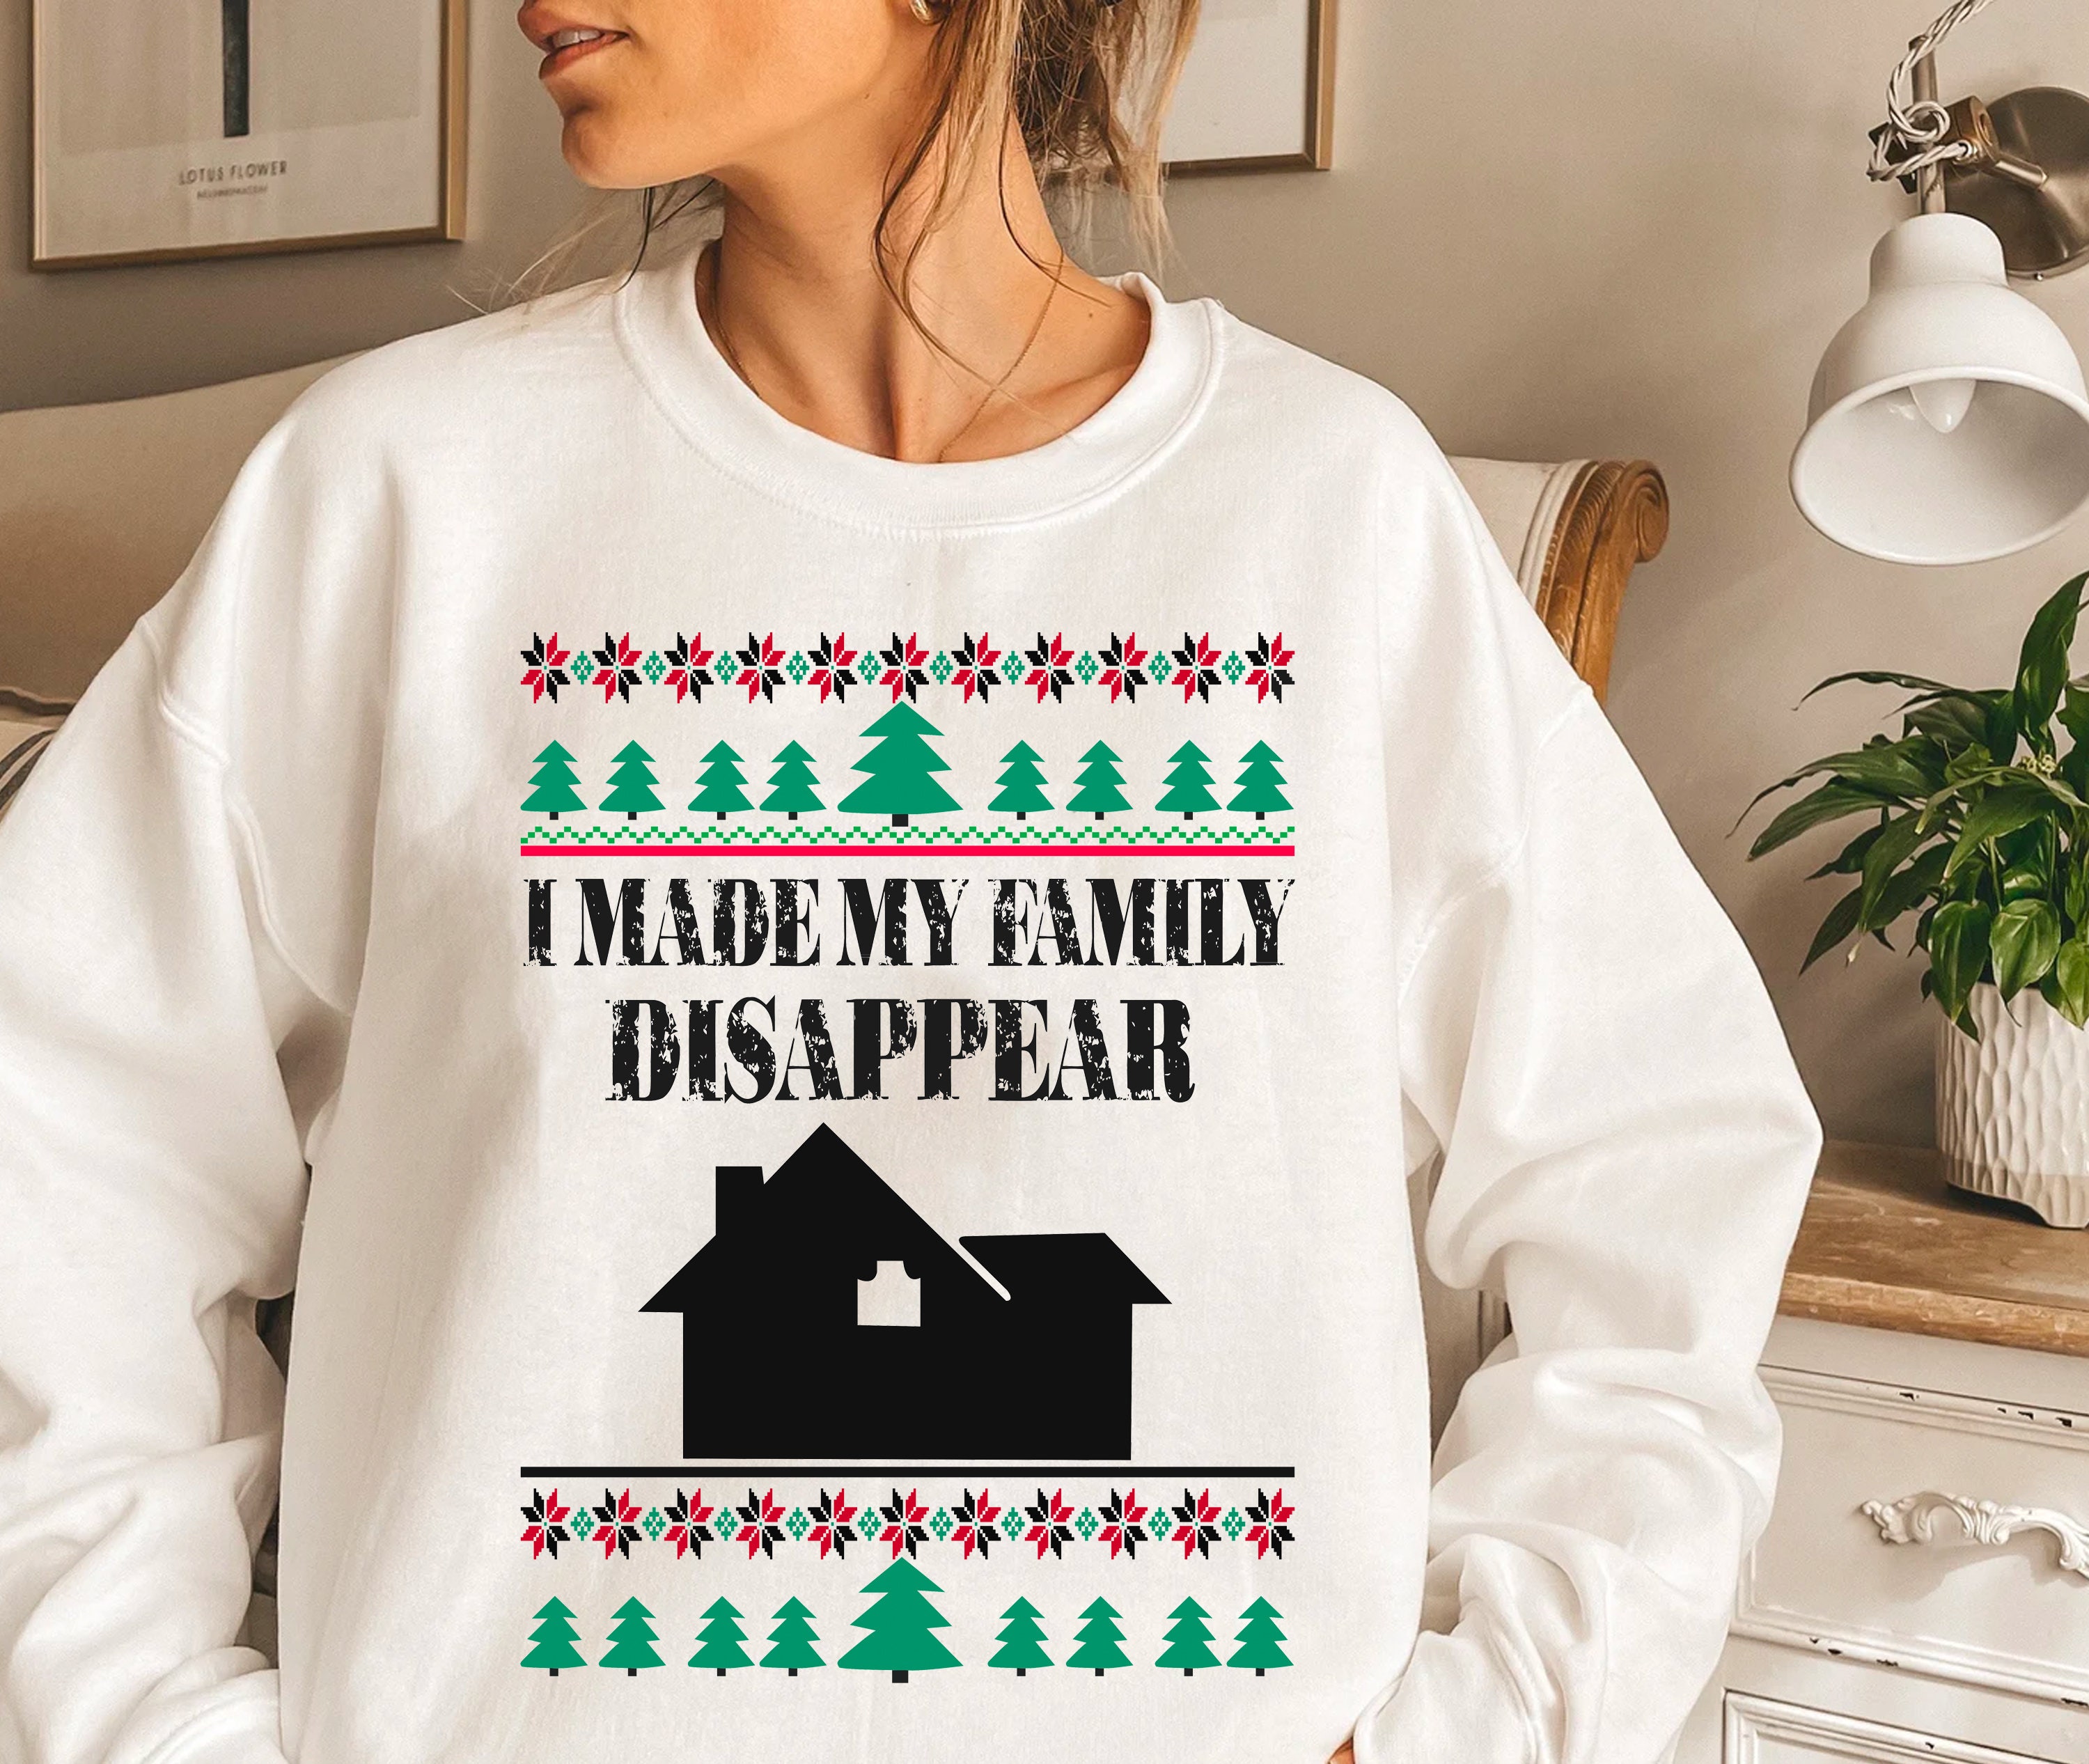 Discover Christmas Sweatshirt,Home Alone Sweater,I Made My Family Disappear Sweatshirt,Christmas Party Outfit,Funny Christmas Sweater,Ugly Sweatshirts